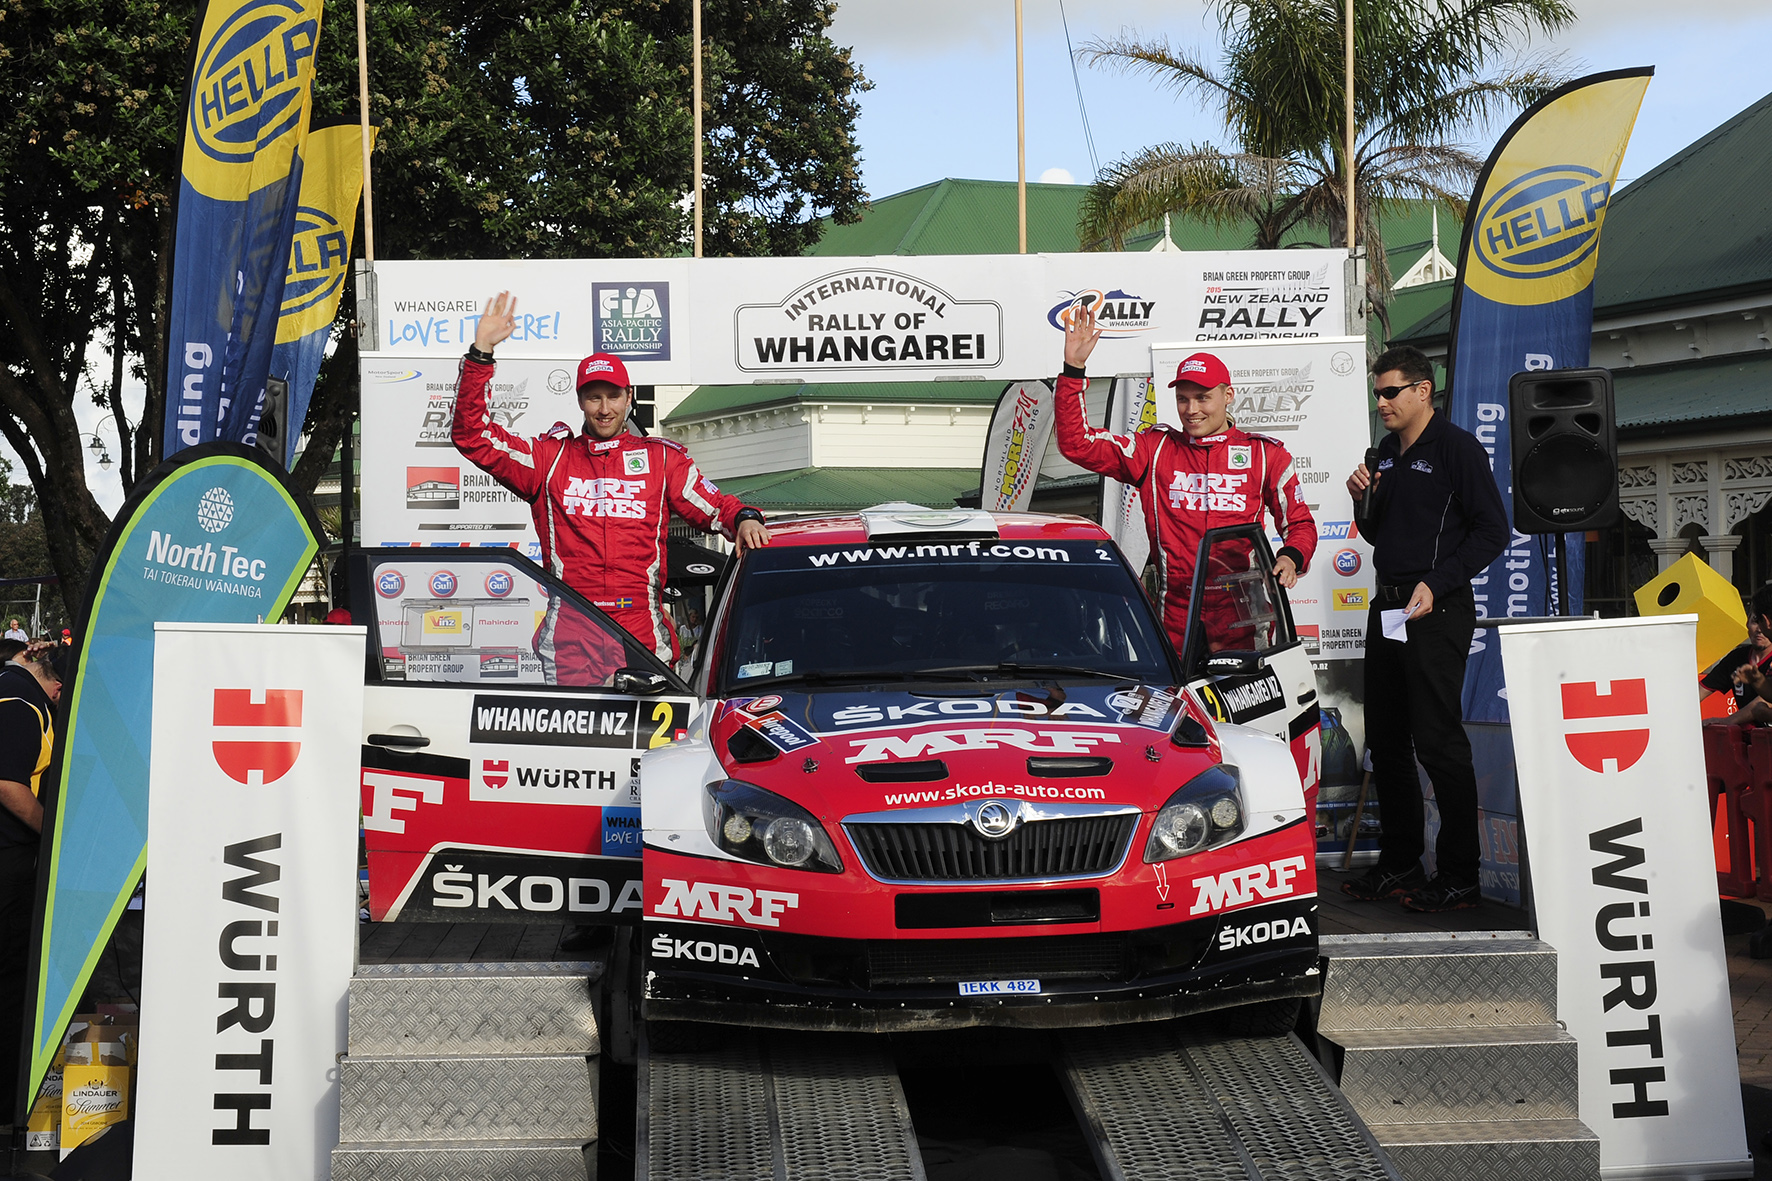 Debut win for Tidemand at International Rally of Whangarei